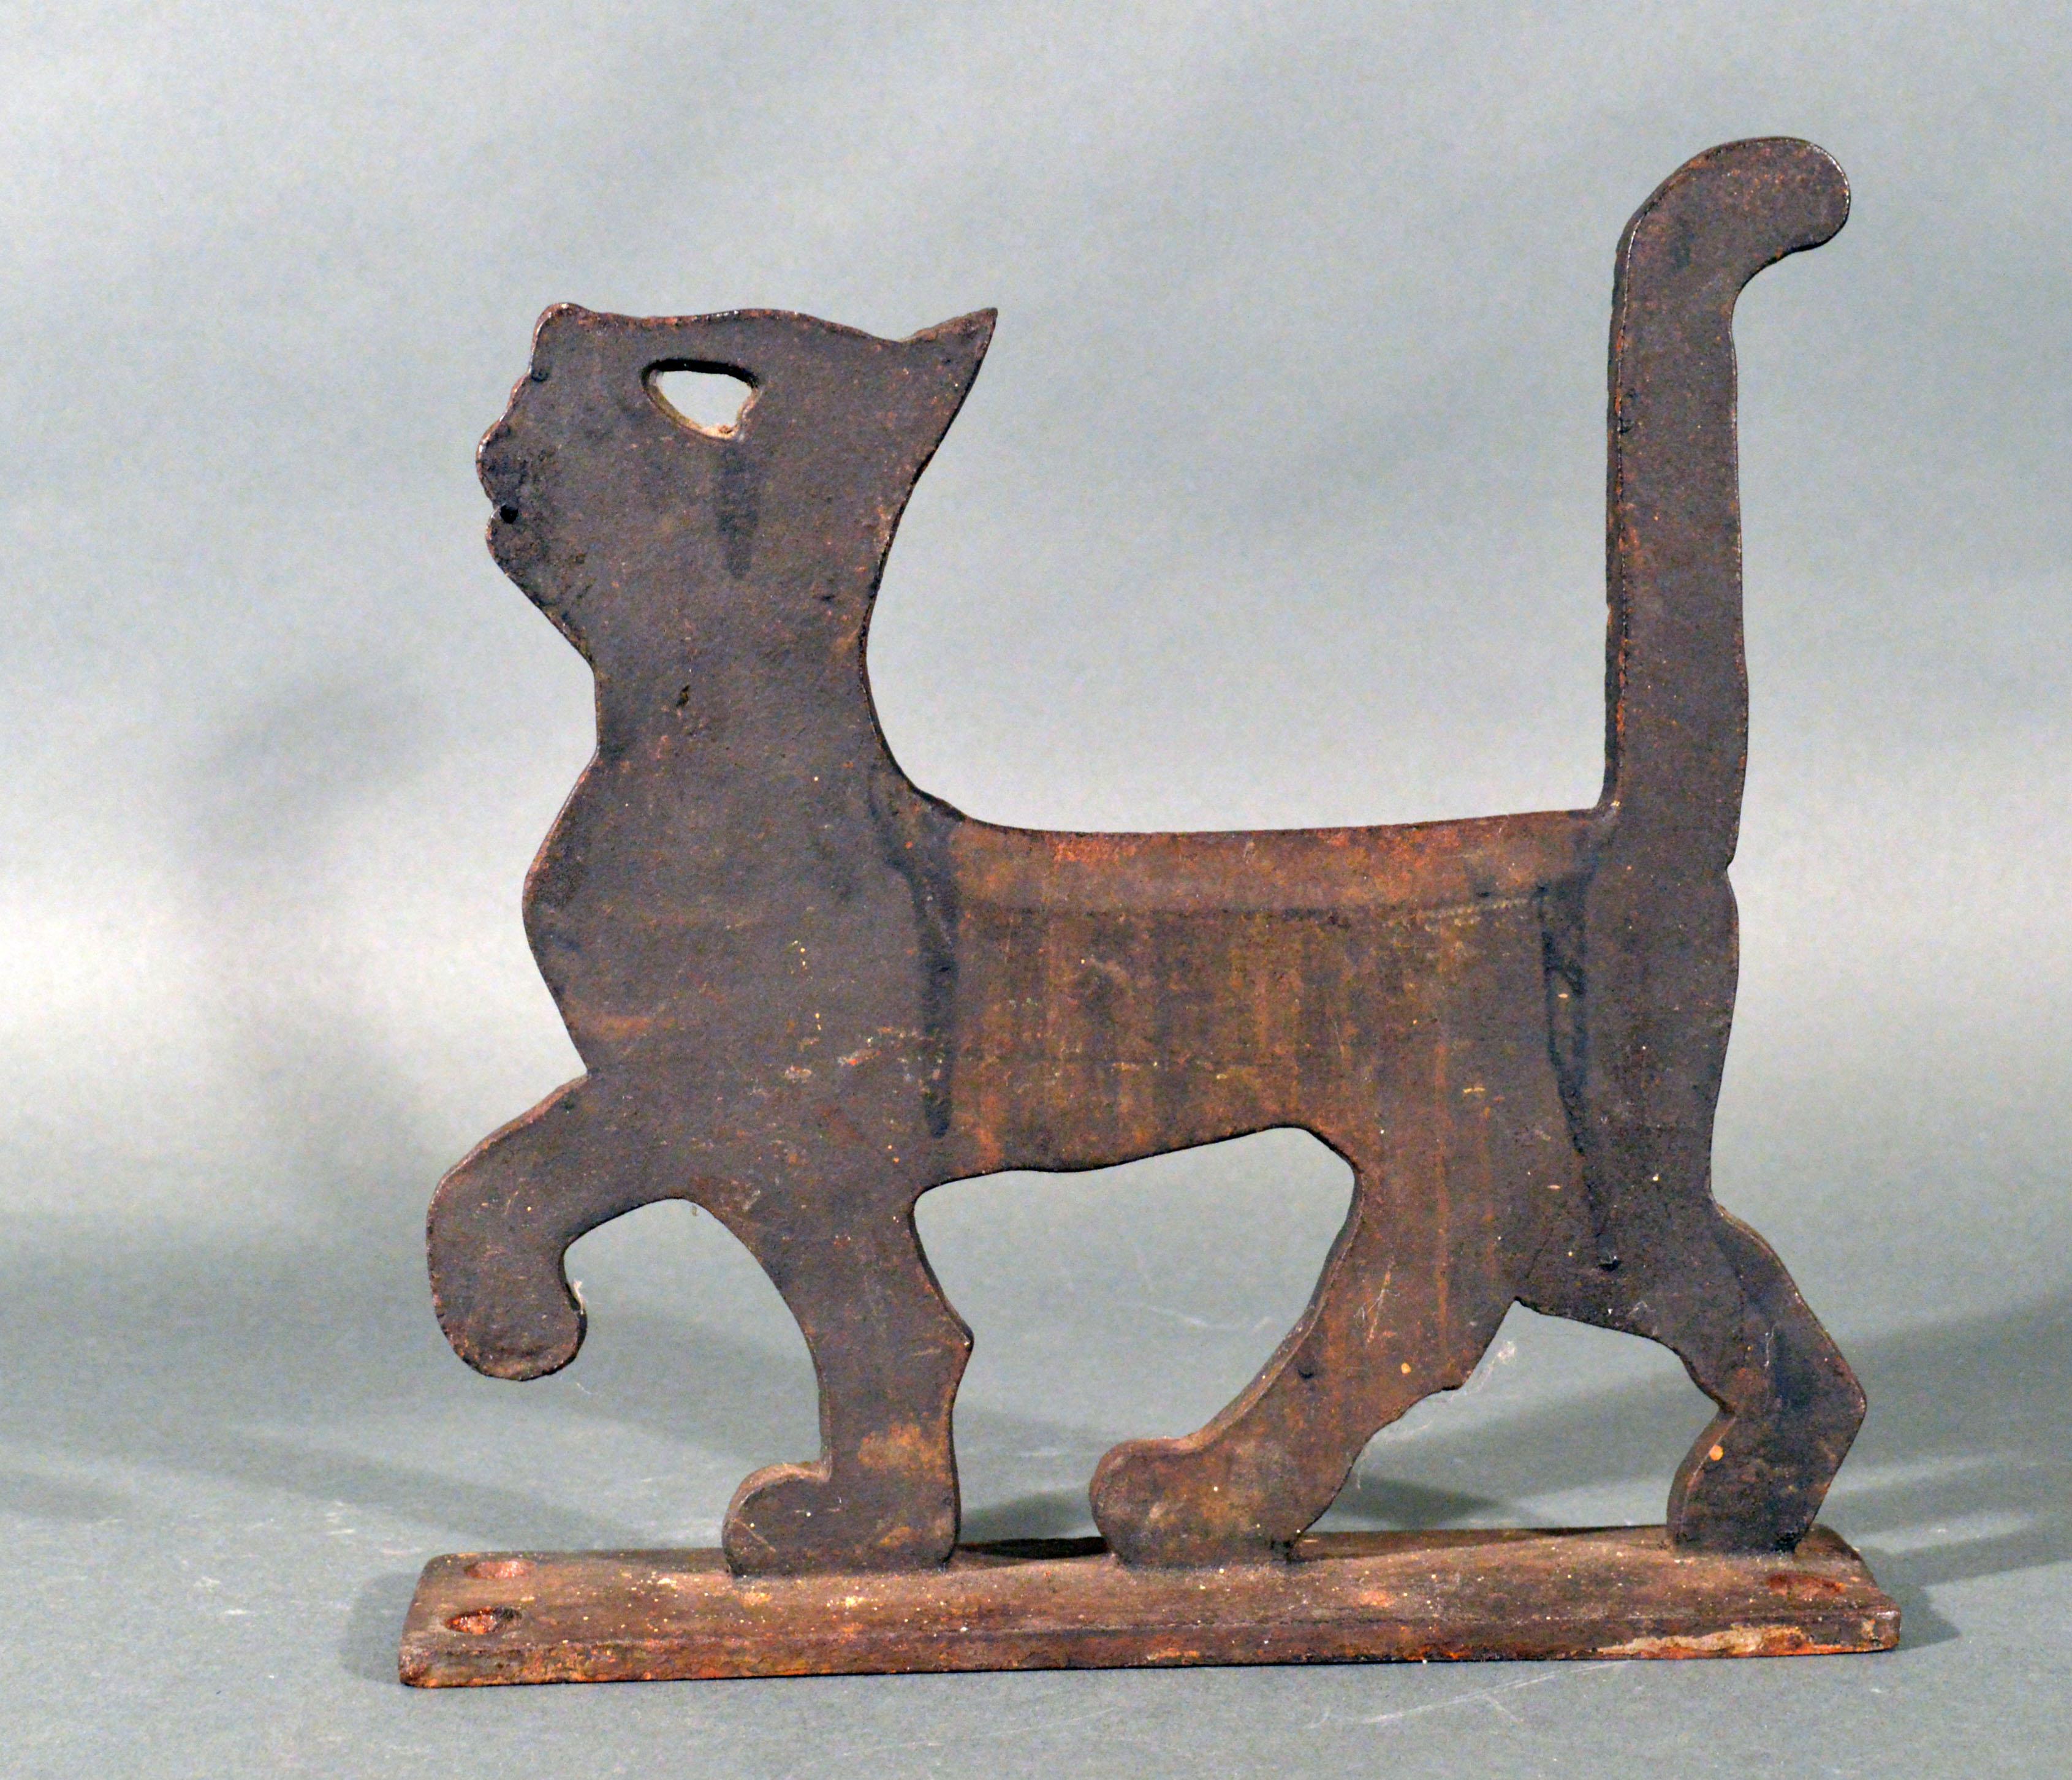 American cast iron boot scraper in the form of a cat,
Household Patent Co. Norristown, PA,
circa 1926
(NY9379-NKR)

The charming Folk Art boot scrapper is in the form of a prancing cat with a pierced heart-shaped eye. The cat with an integrated